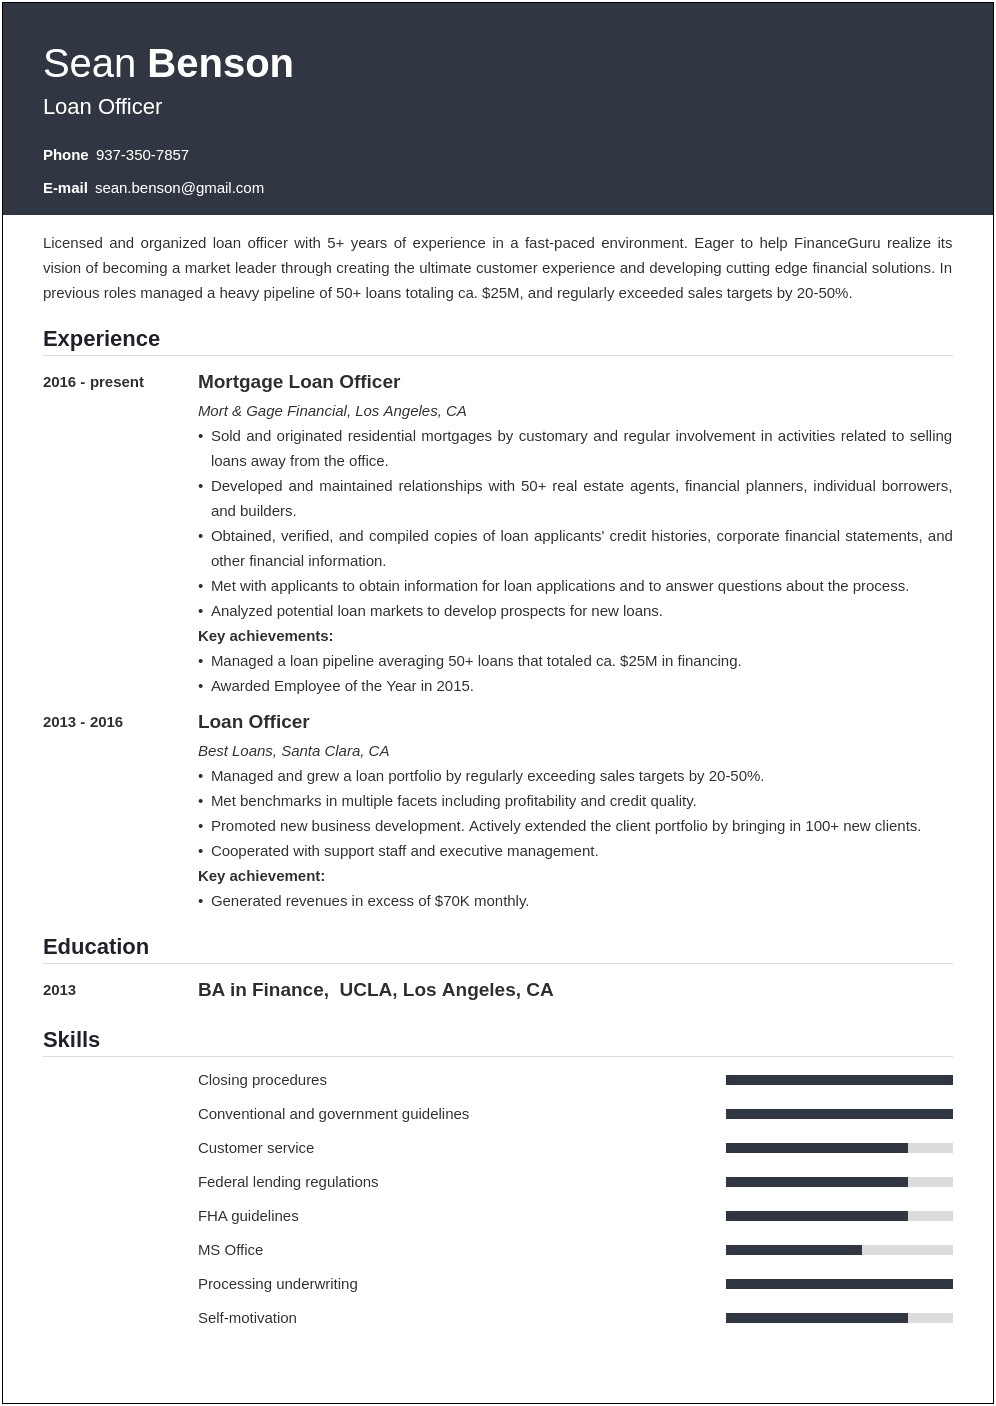 Skills And Abilities For Resume Loan Officer